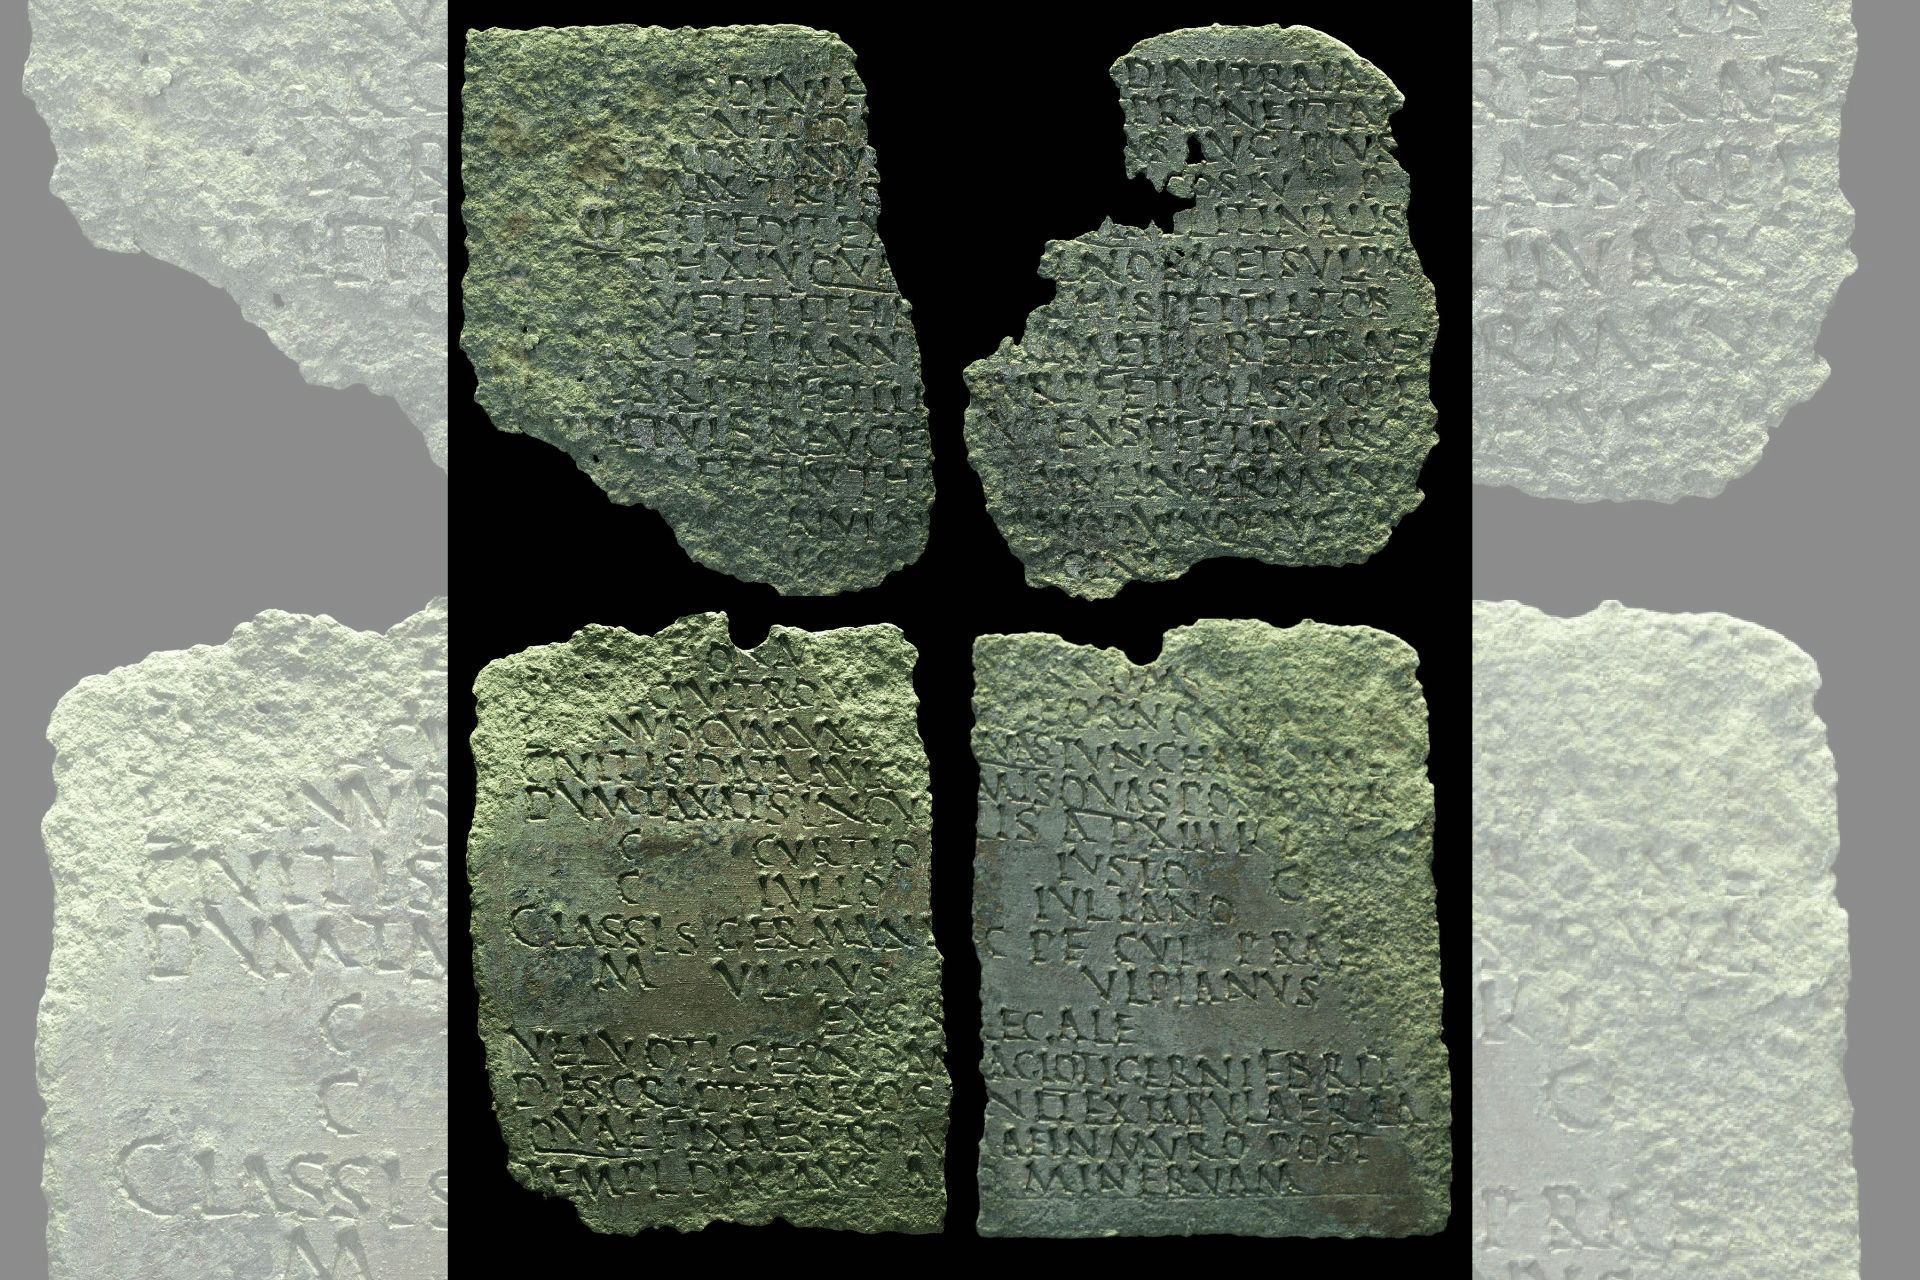 A coloured photograph of the Lanchester Diploma, which is made up of 4 pieces of copper alloy with latin inscribed onto it.